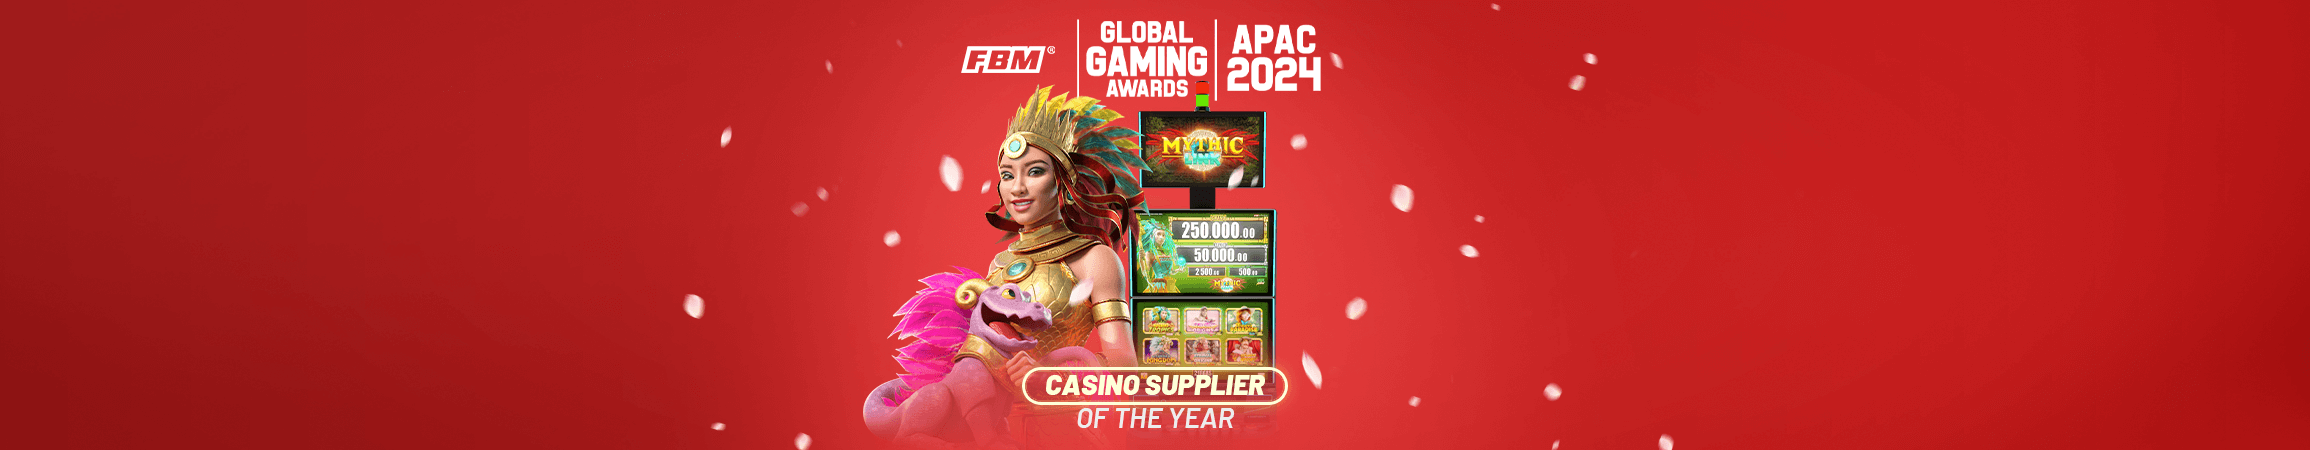  FBM® shortlisted for “Casino Supplier of the Year” at the Global Gaming Awards Asia-Pacific 